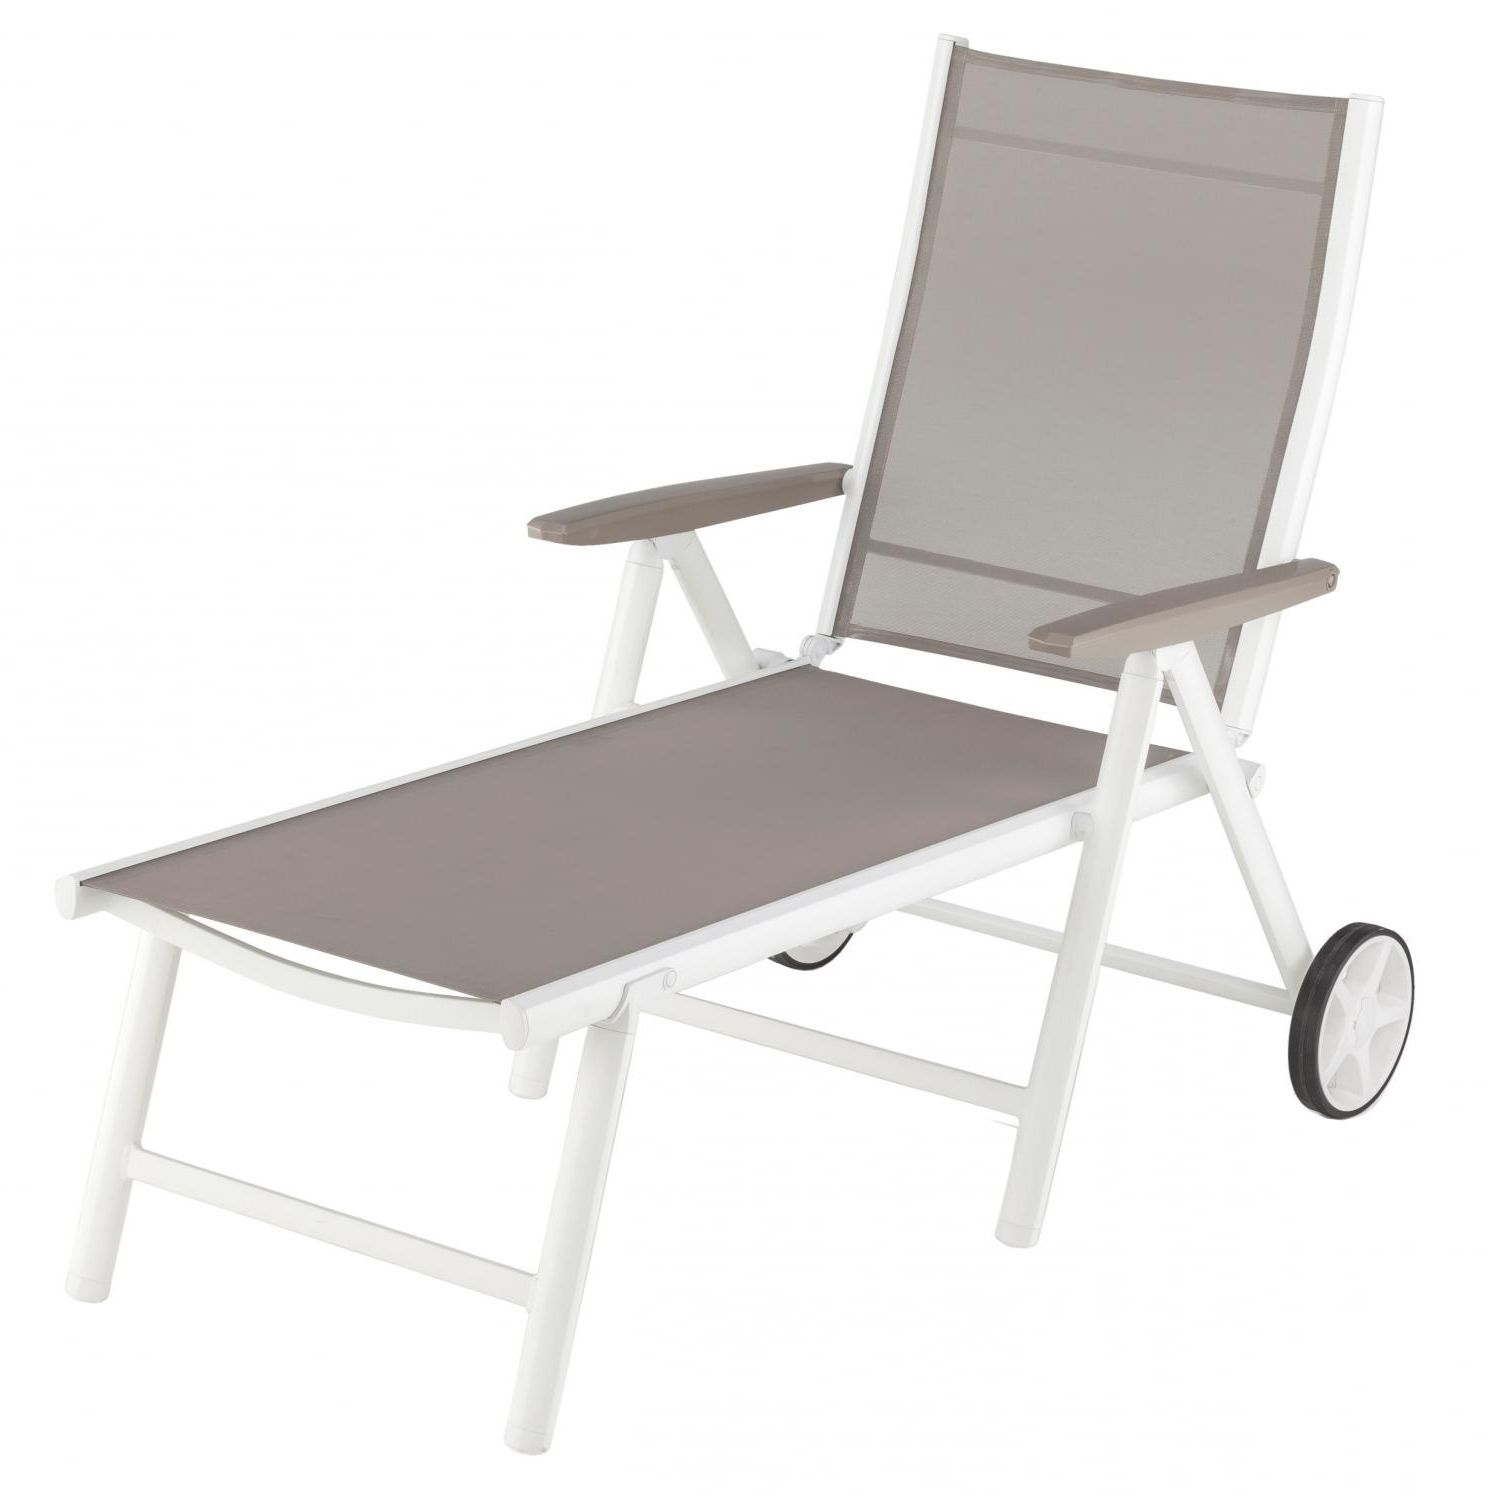 Kettler Chaise Lounge Chairs Within Trendy Kettler Vista Aluminum Patio Chaise Lounge – Gray : Ultimate Patio (View 5 of 15)